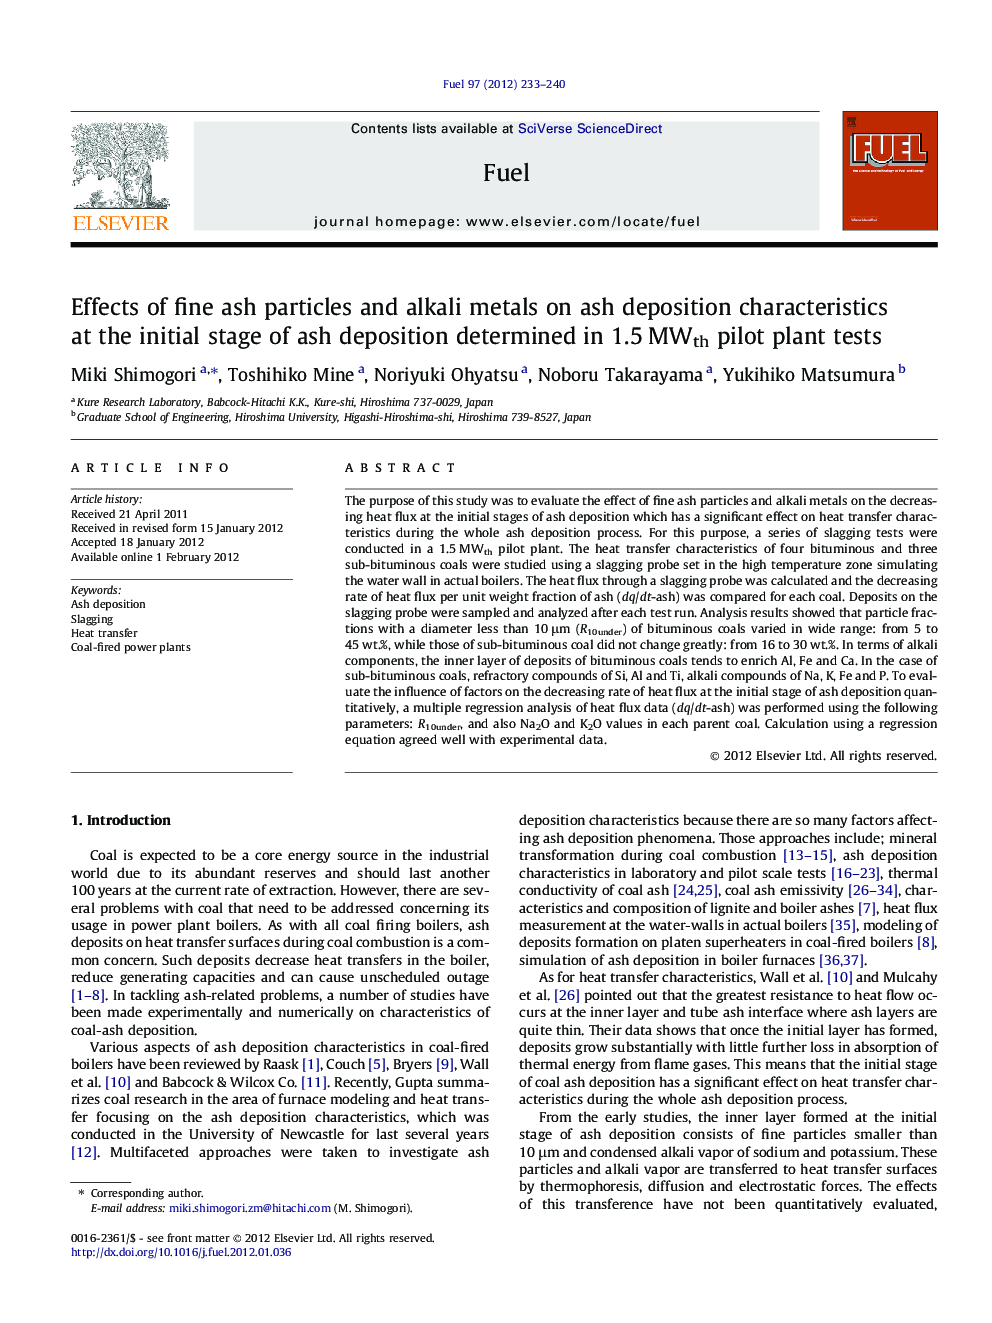 Effects of fine ash particles and alkali metals on ash deposition characteristics at the initial stage of ash deposition determined in 1.5Â MWth pilot plant tests